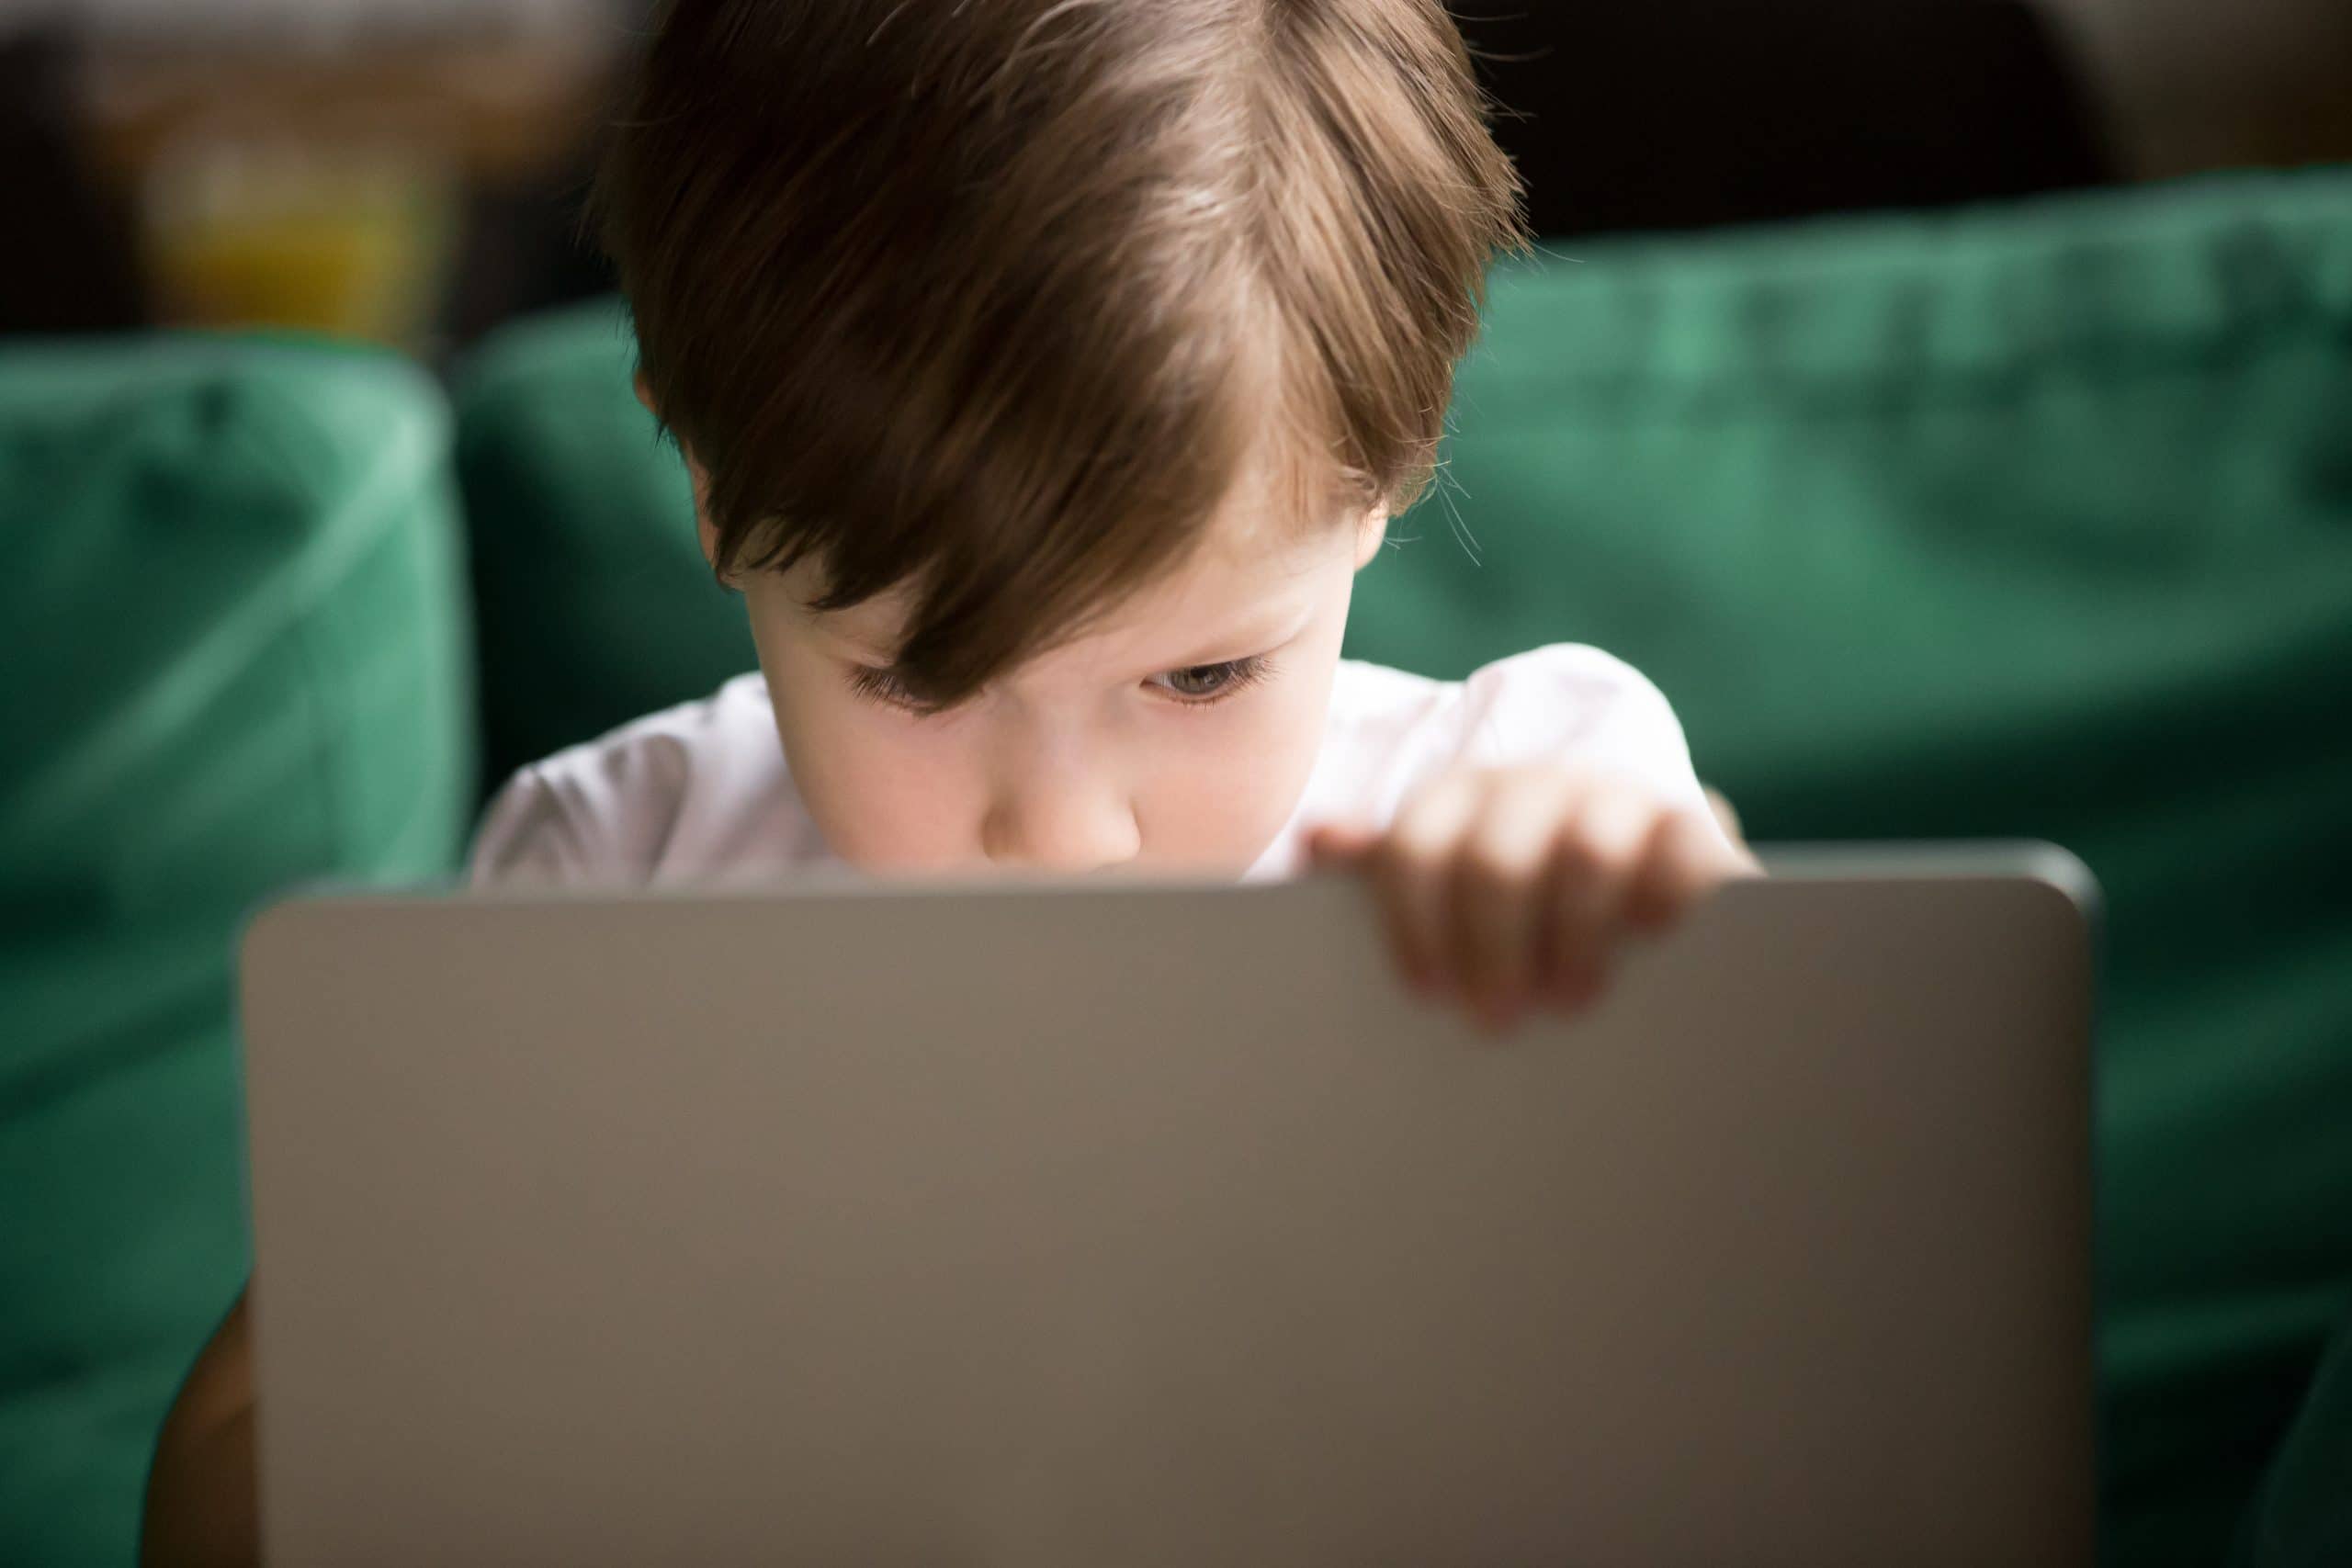 One simple step to protect children from online predators this Safer Internet Day